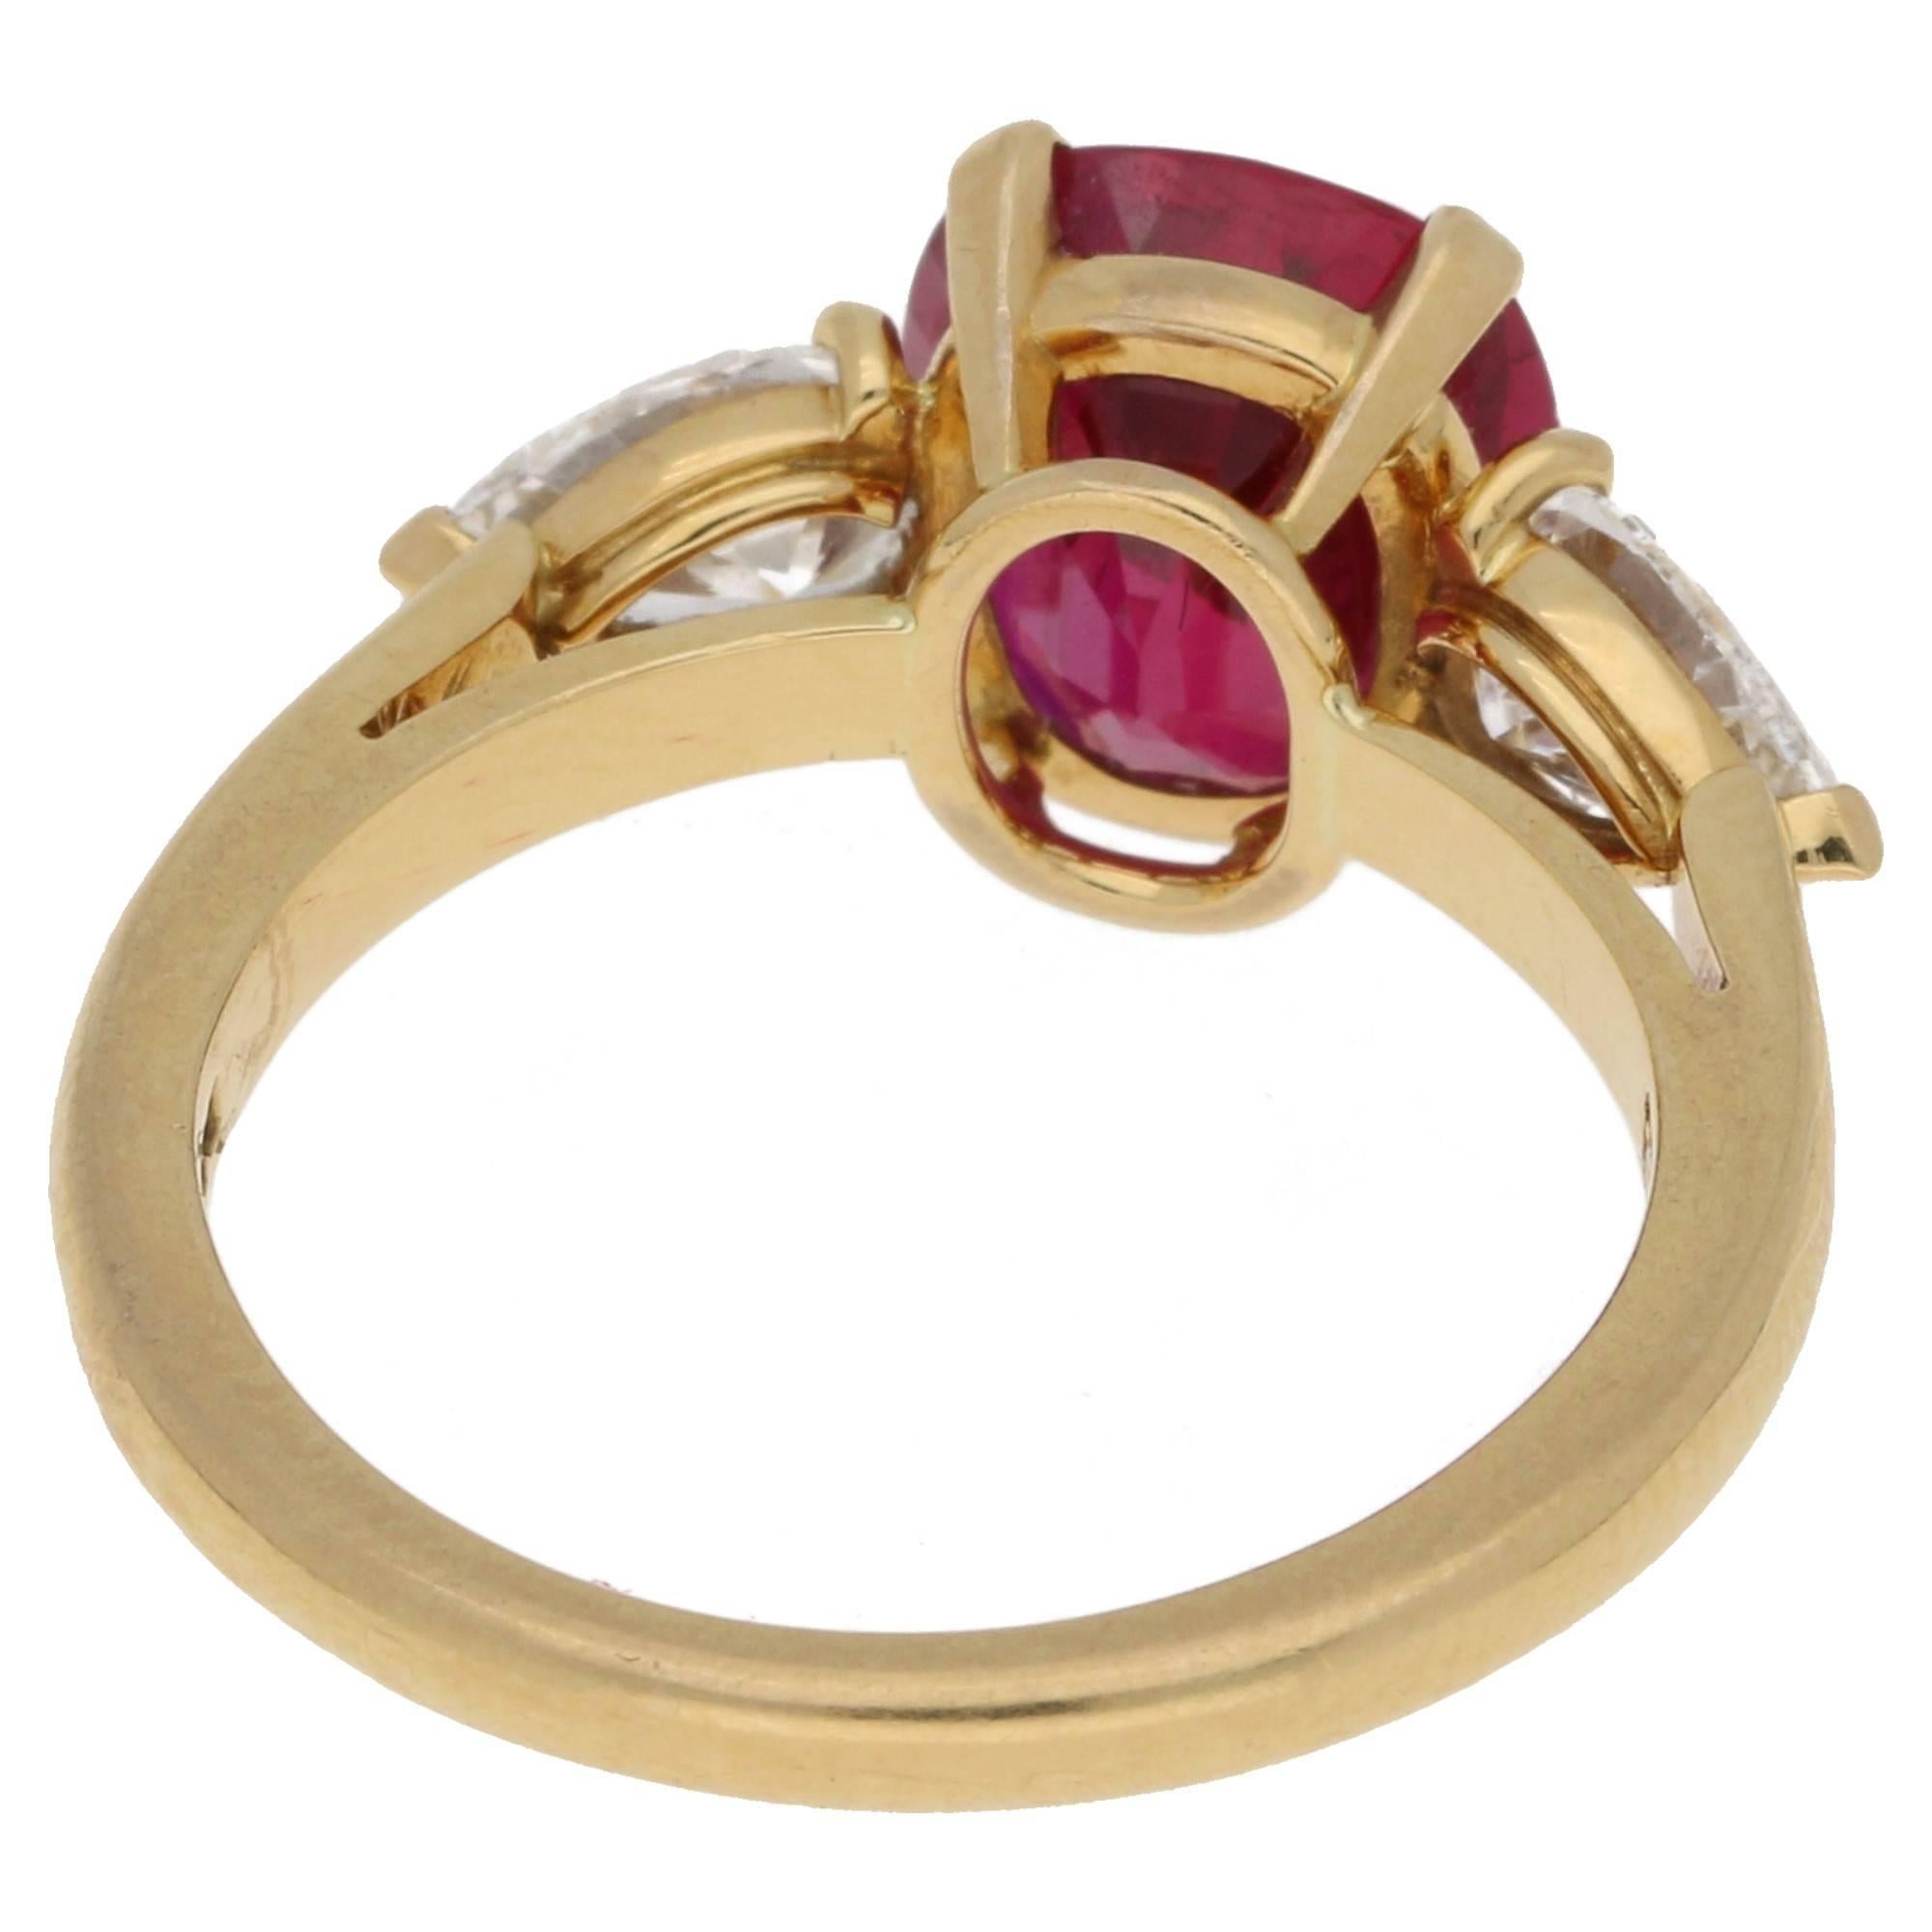 Pear Cut Burmese Ruby and Flawless Diamond Engagement Ring in 18k Yellow Gold